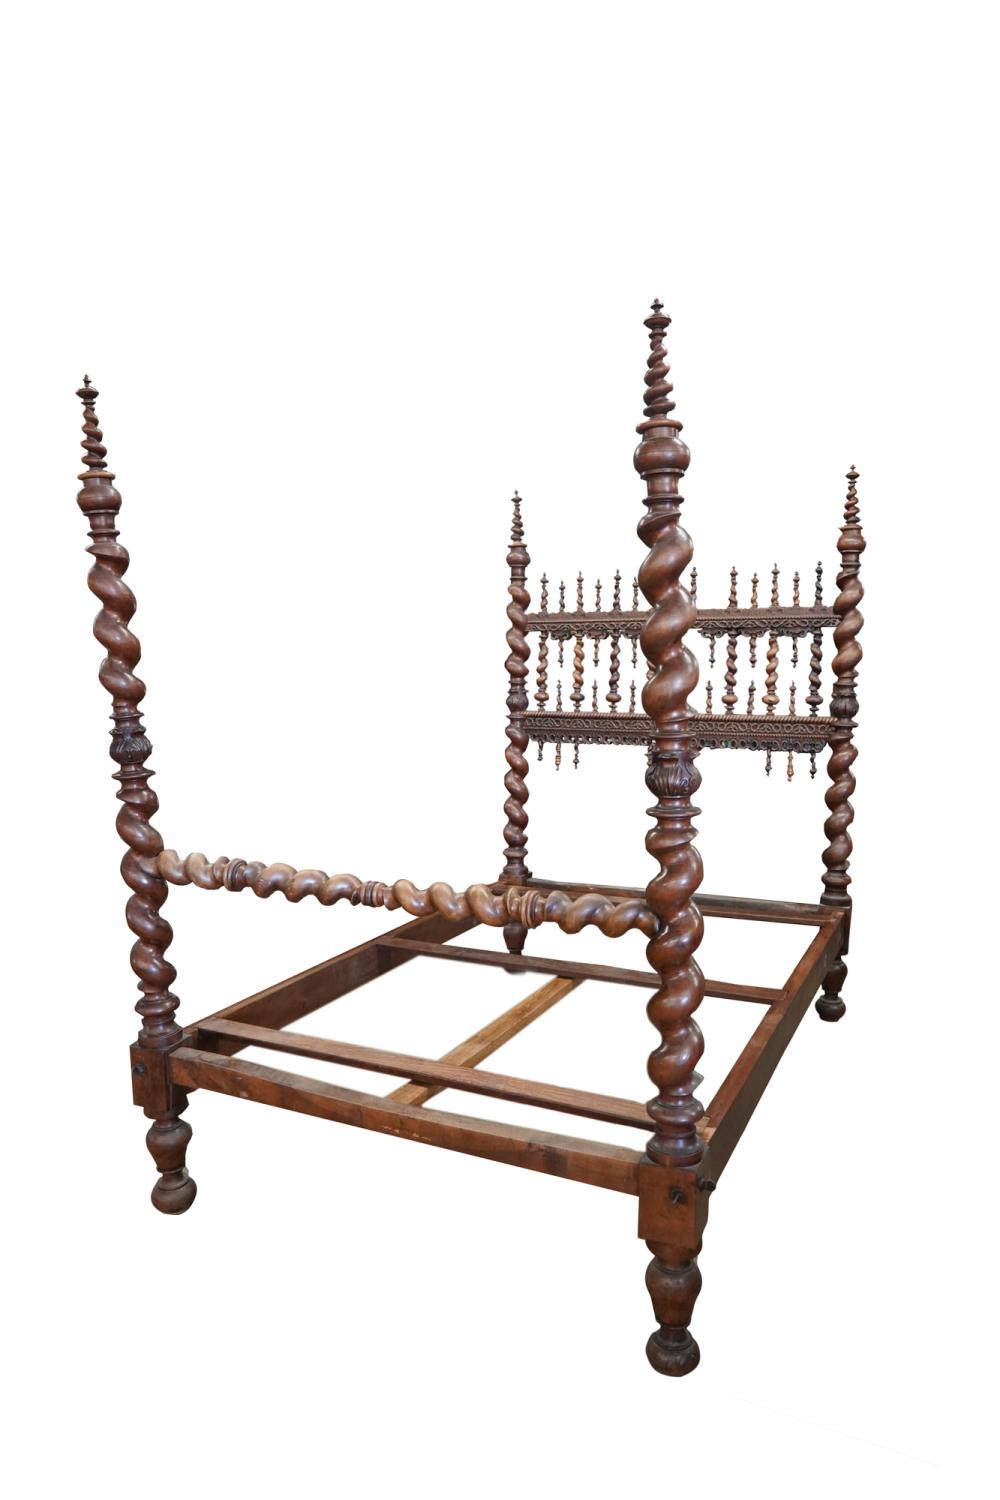 TURNED & CARVED WOOD BEDCondition: